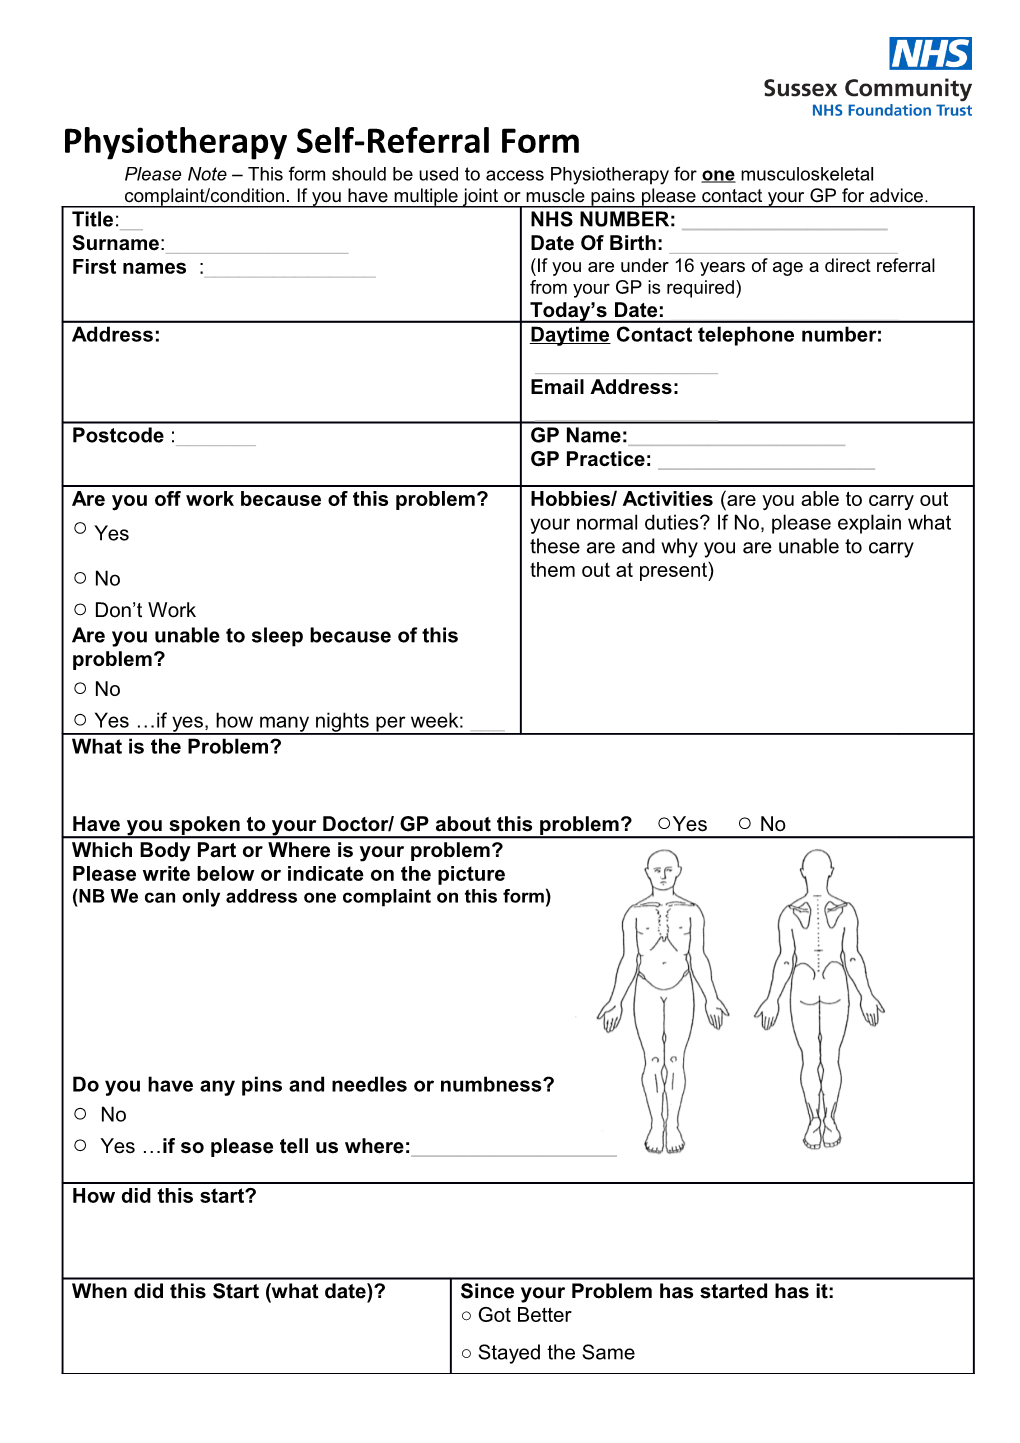 Physiotherapy Self-Referral Form